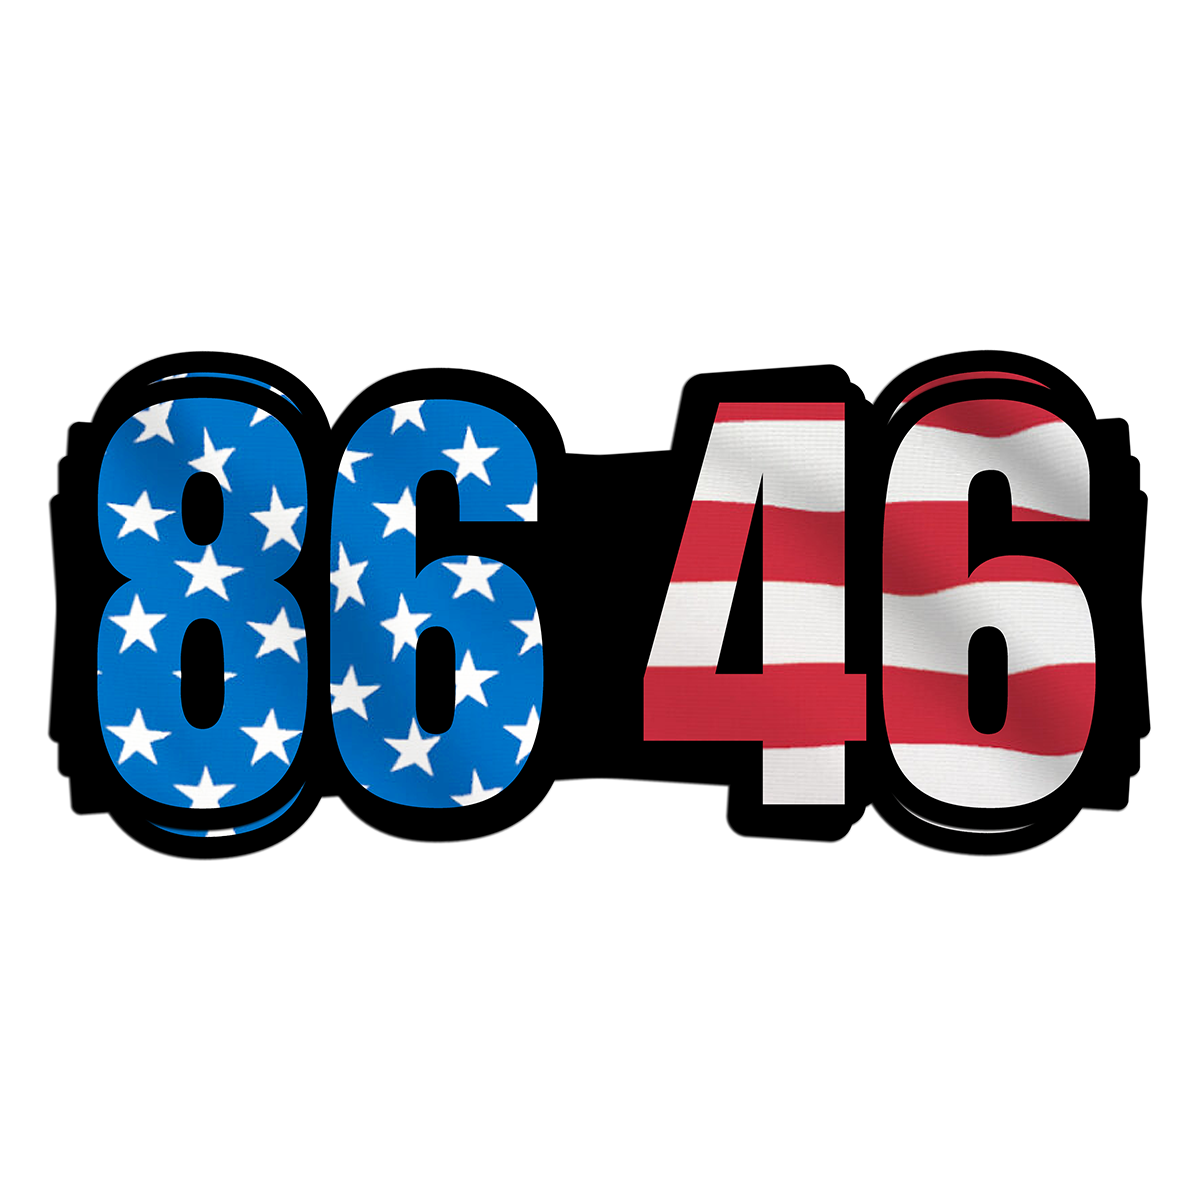 "86 46" - Decal